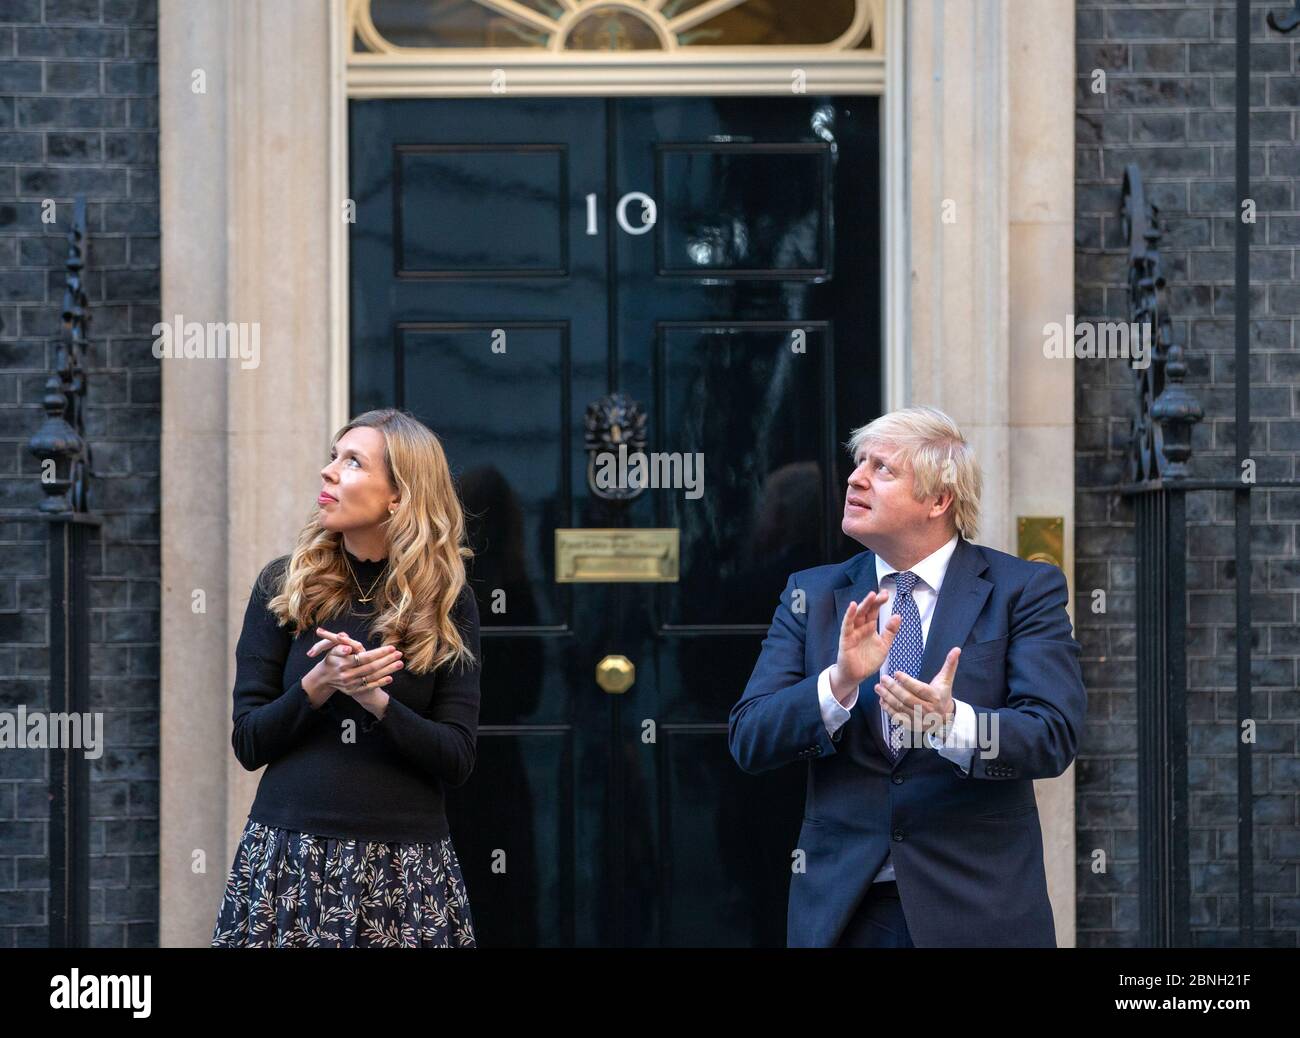 Prime Minister, Boris Johnson, is joined on the steps of 10 Downing Street by  fiancee Carrie Symonds to 'Clap for carers' supporting the NHS. Stock Photo